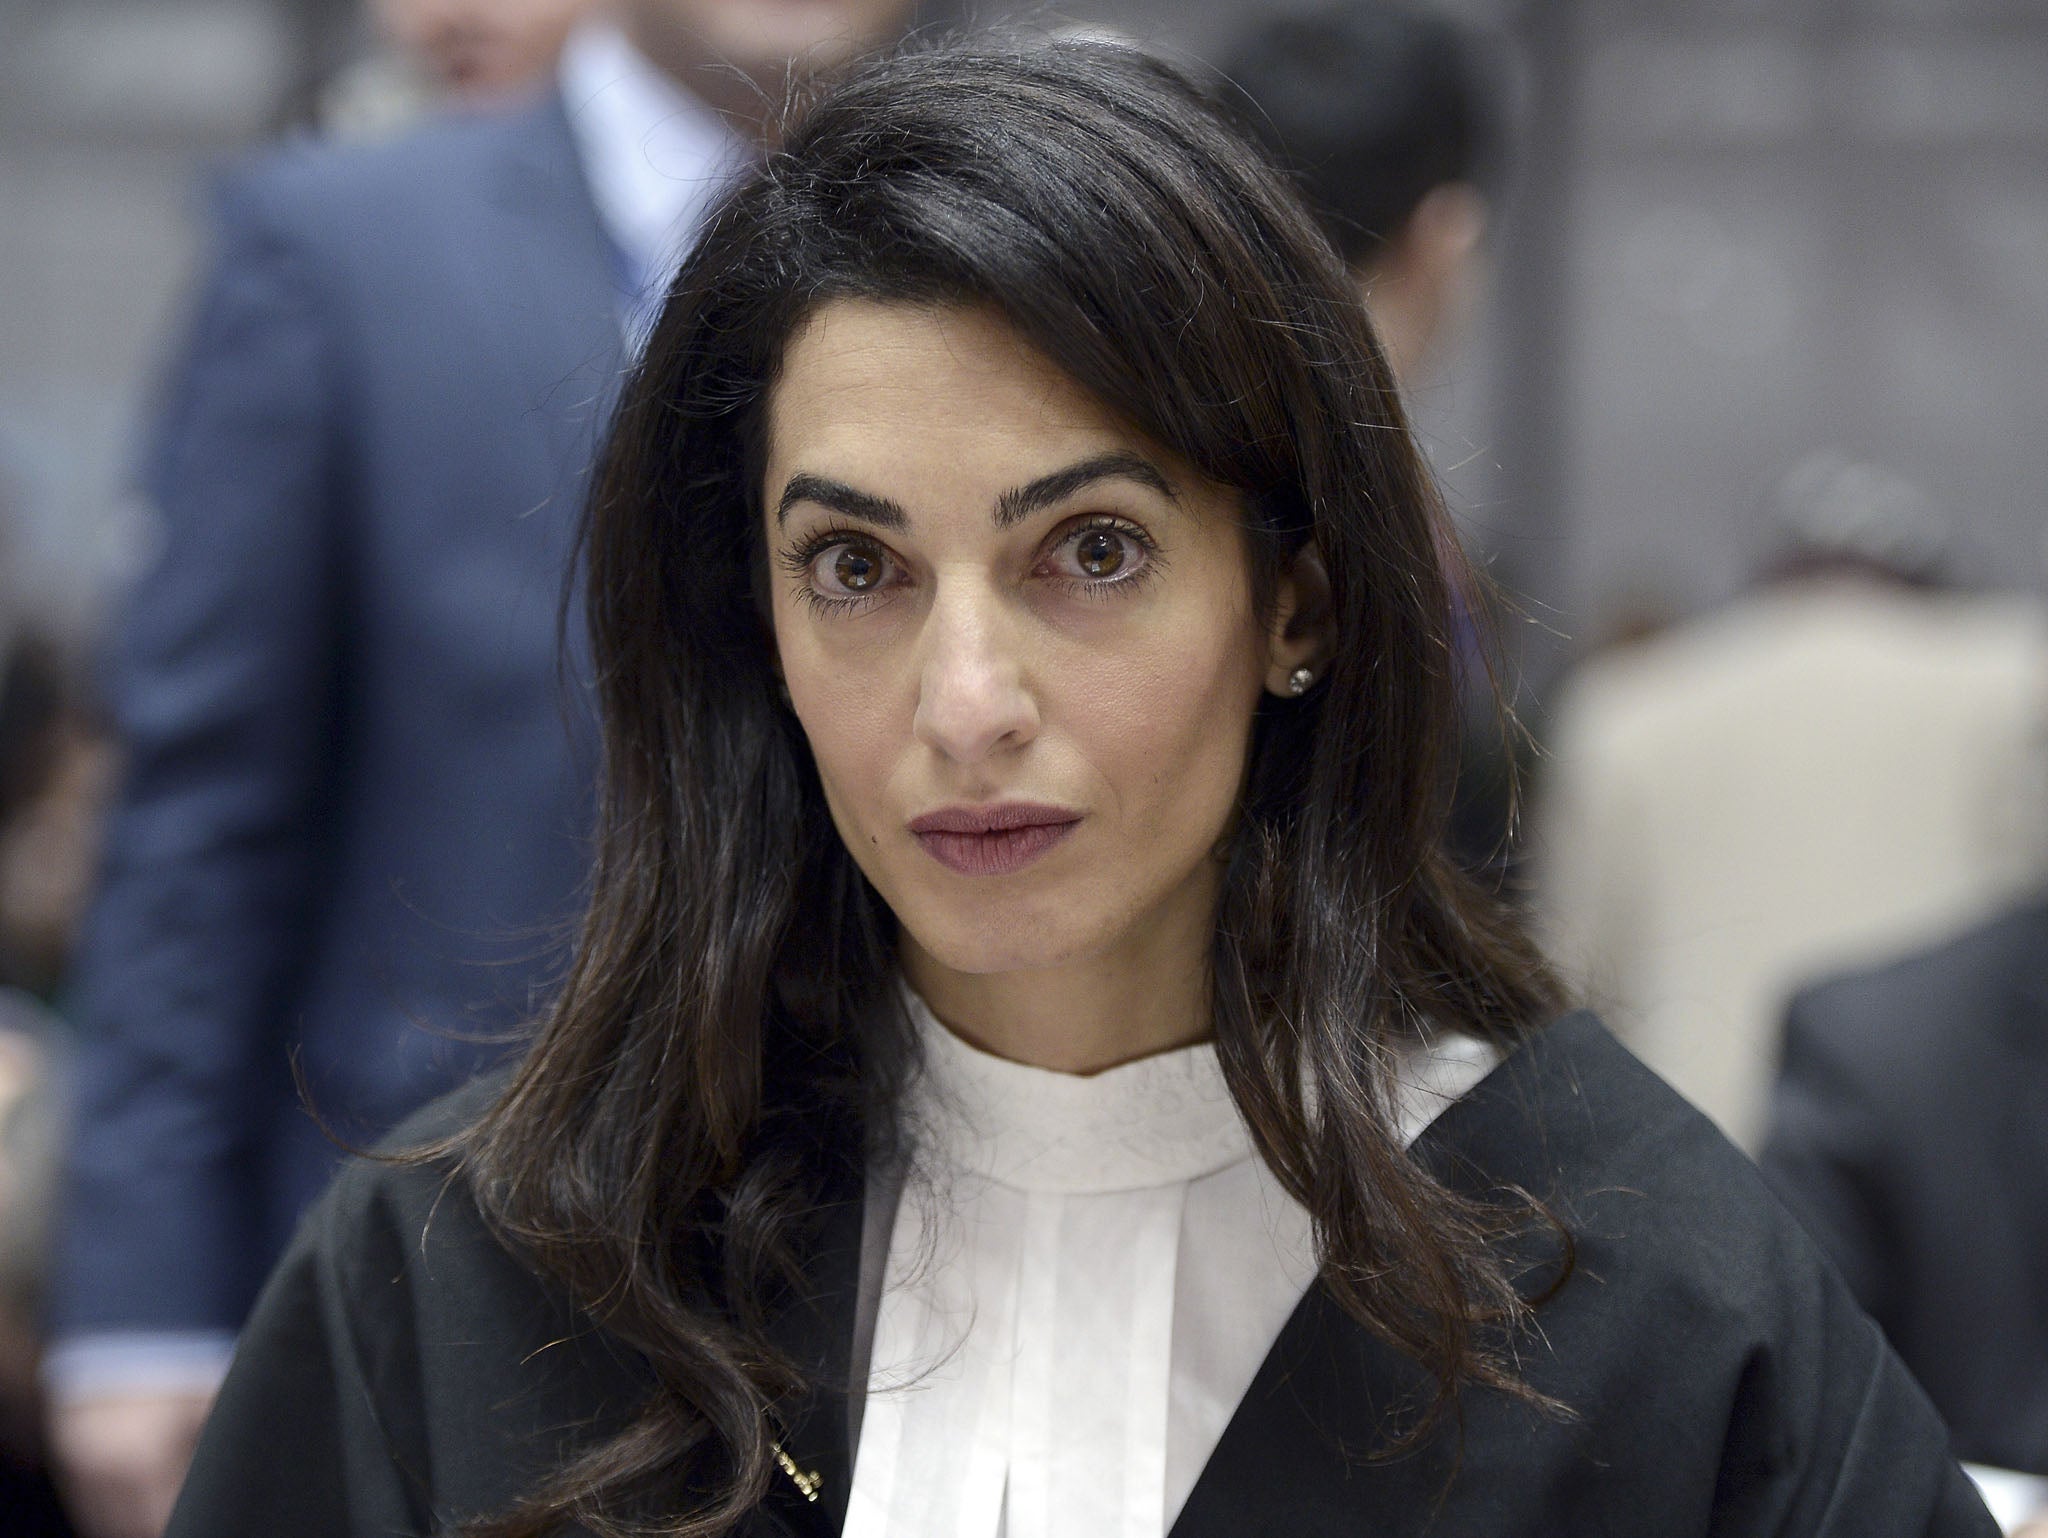 The £20 hair product Amal Clooney uses for her incredible glossy volume